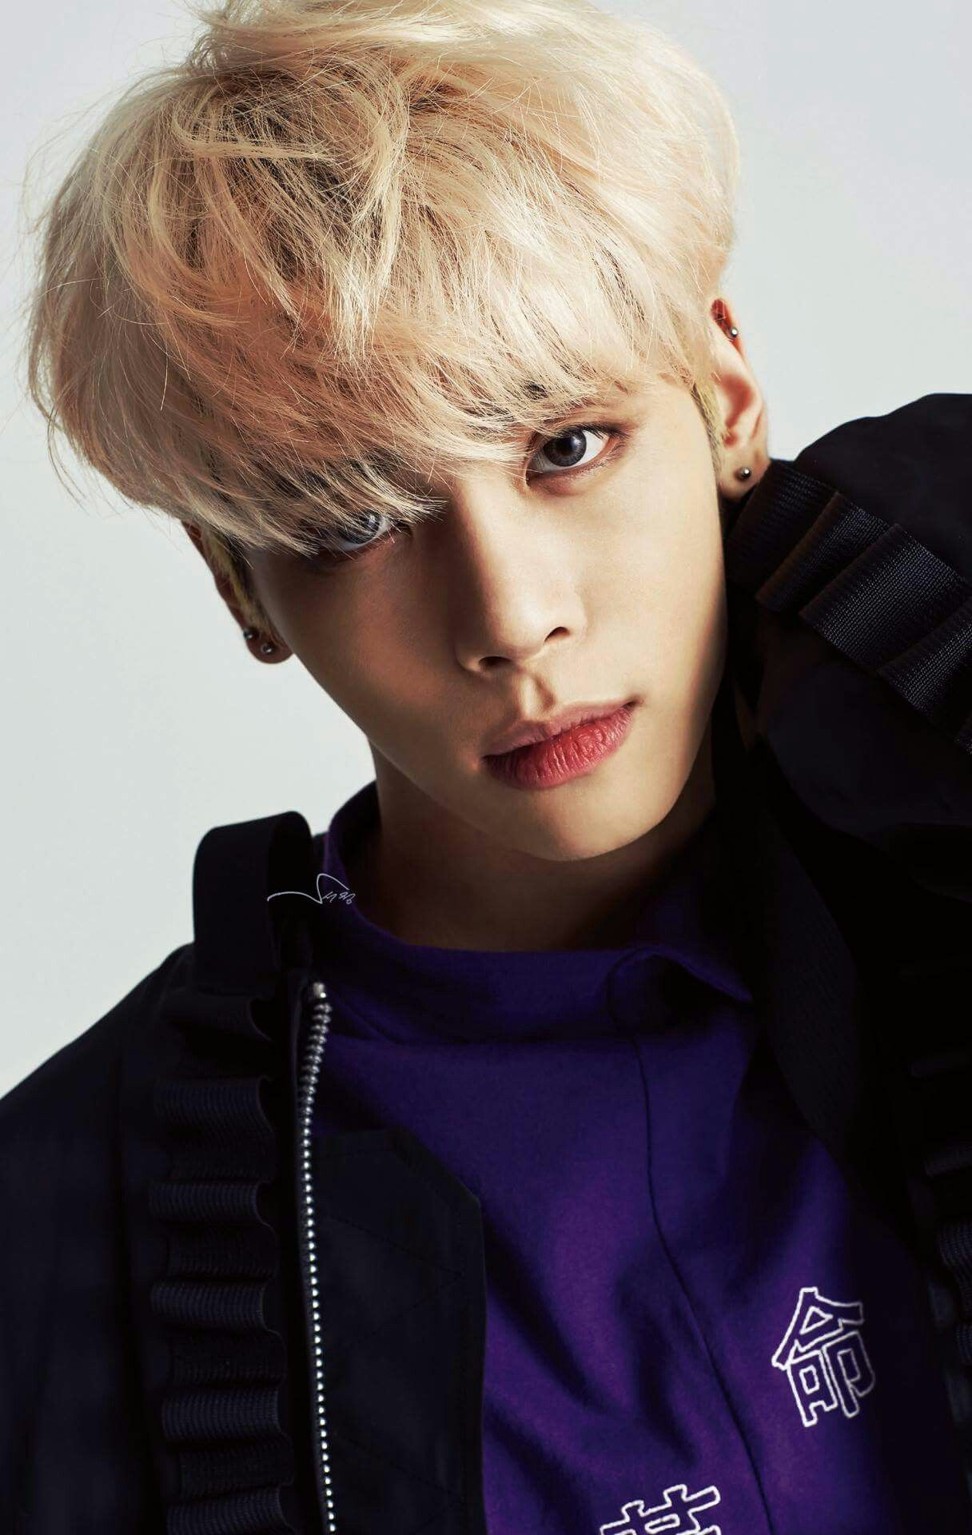 Jonghyun, a former member of Shinee, committed suicide in December 2017.